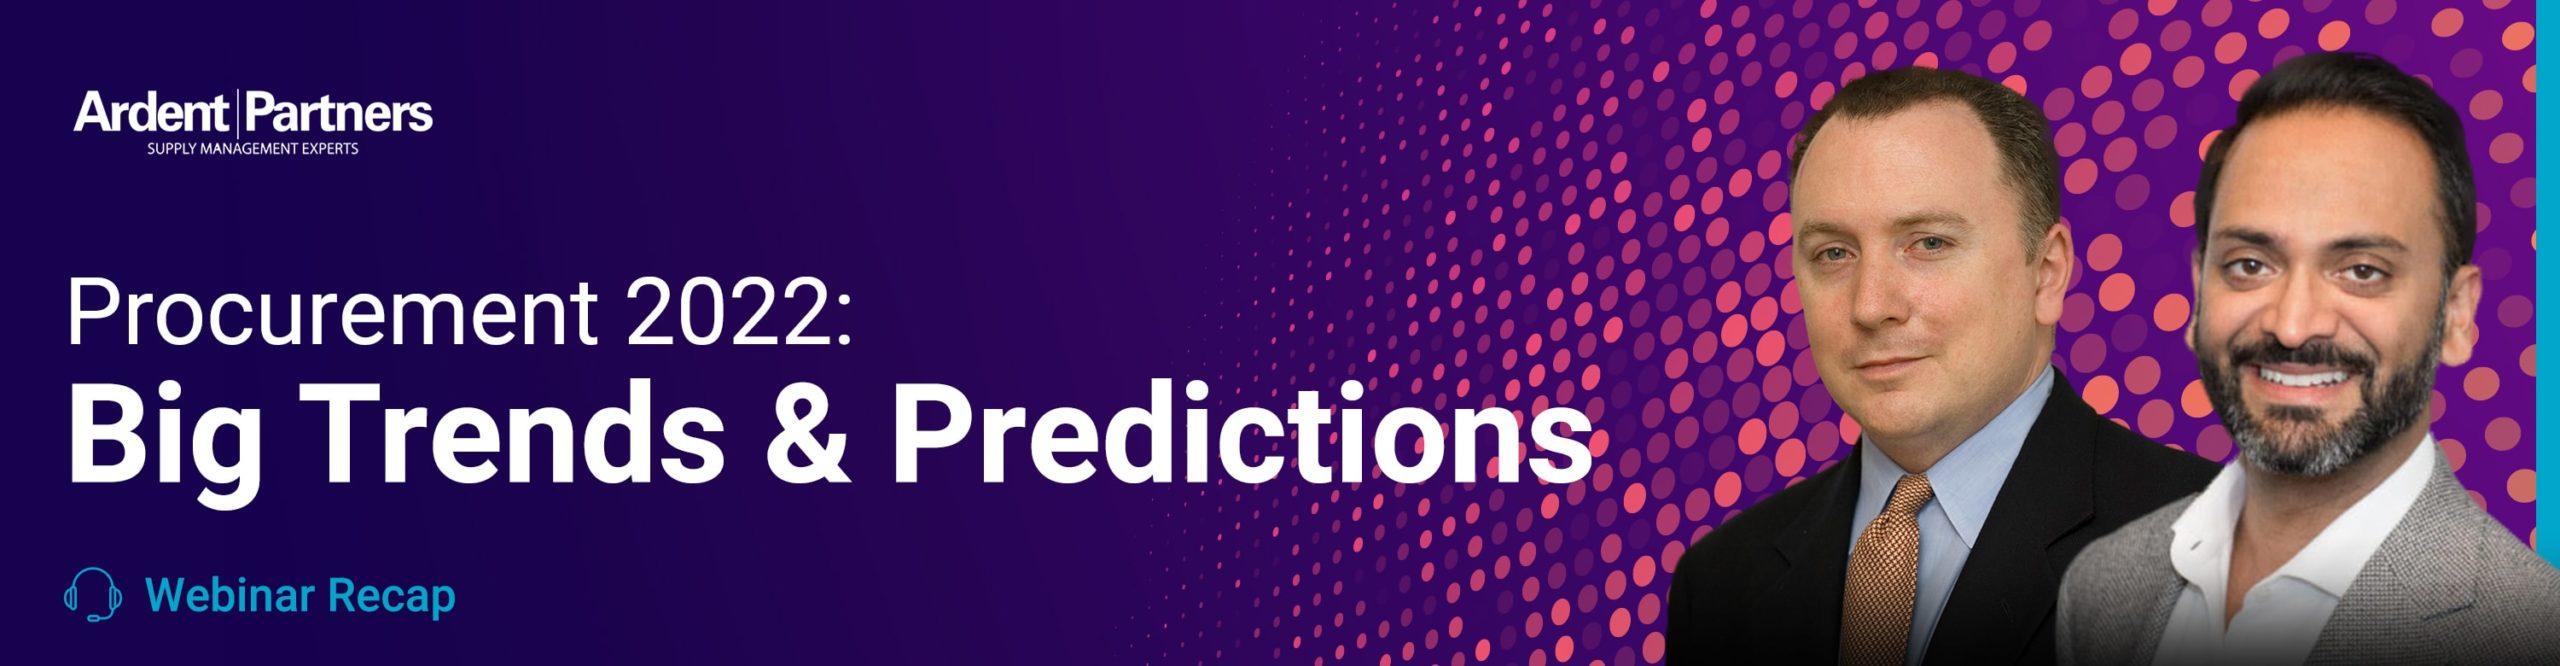 Big Trends and Predictions